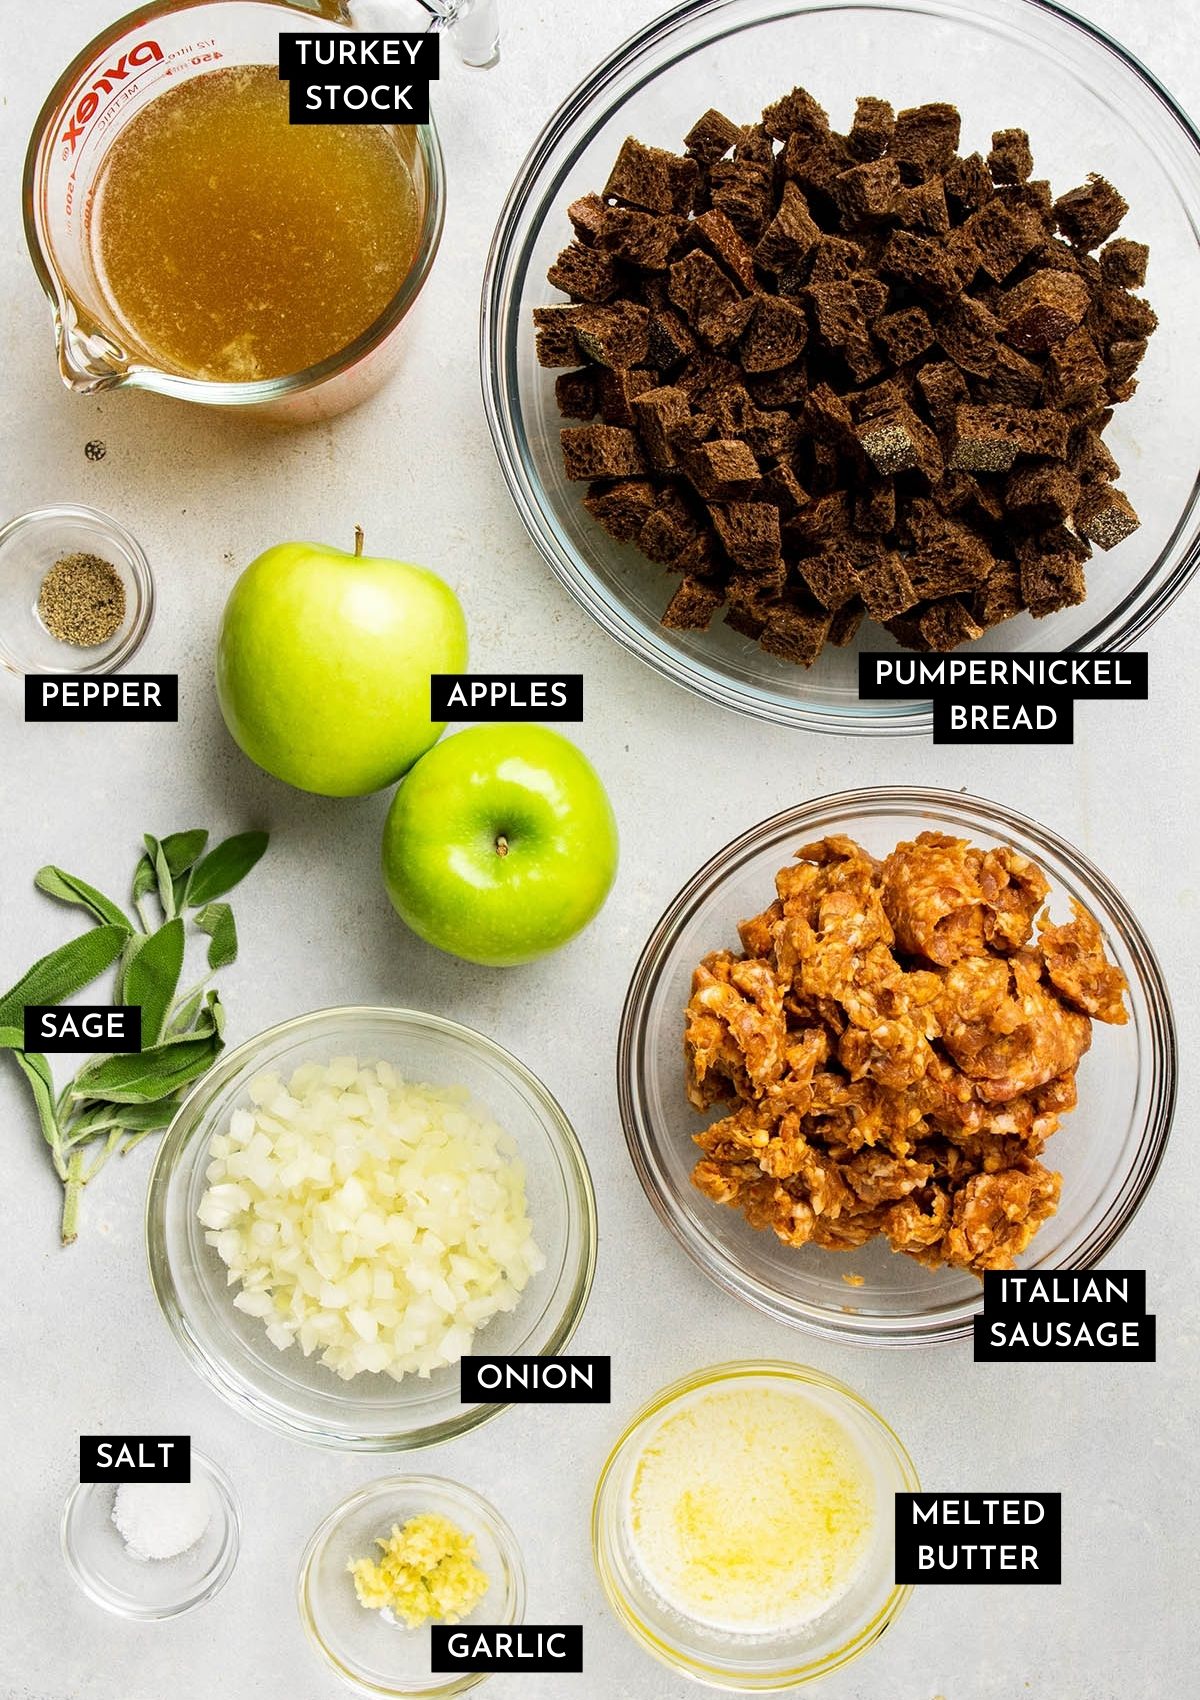 Stuffing ingredients, prepped and measured into individual bowls.